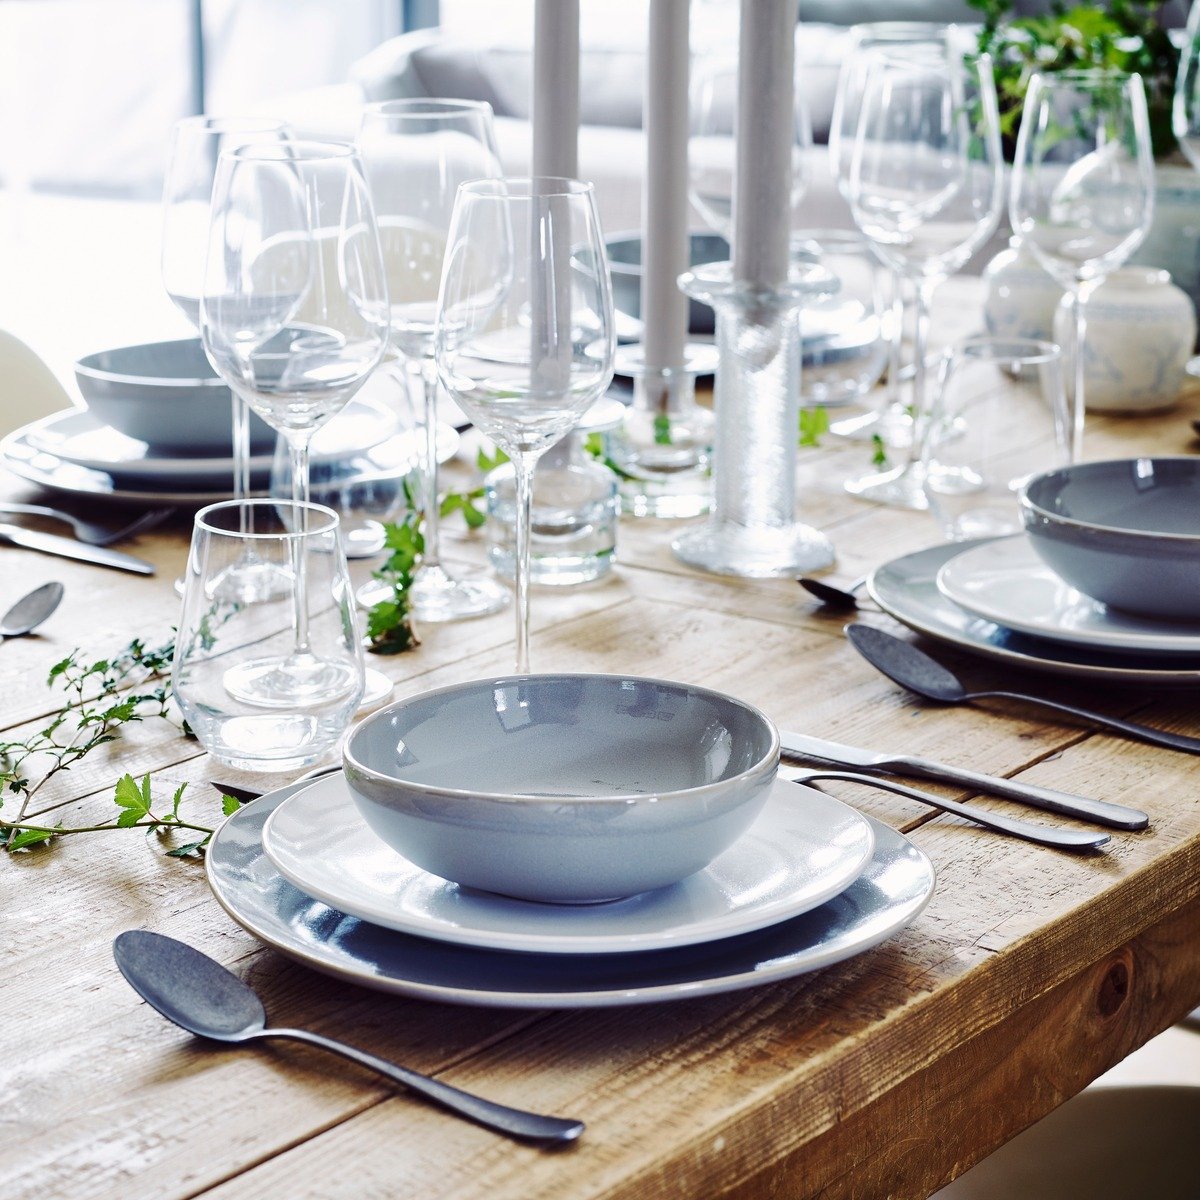  - Shop by Category - Tableware